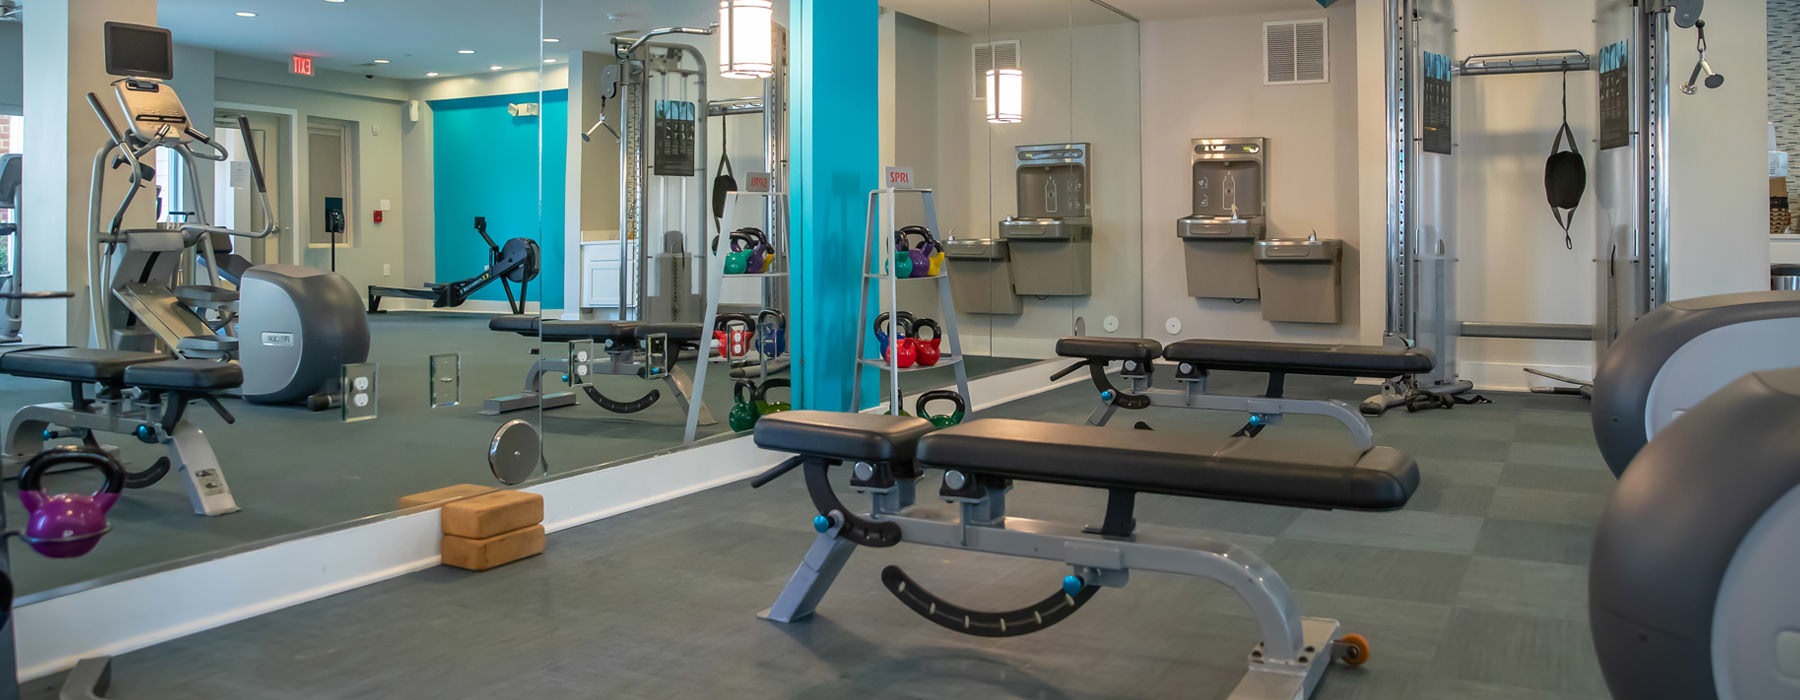 large fitness center with wall of mirrors